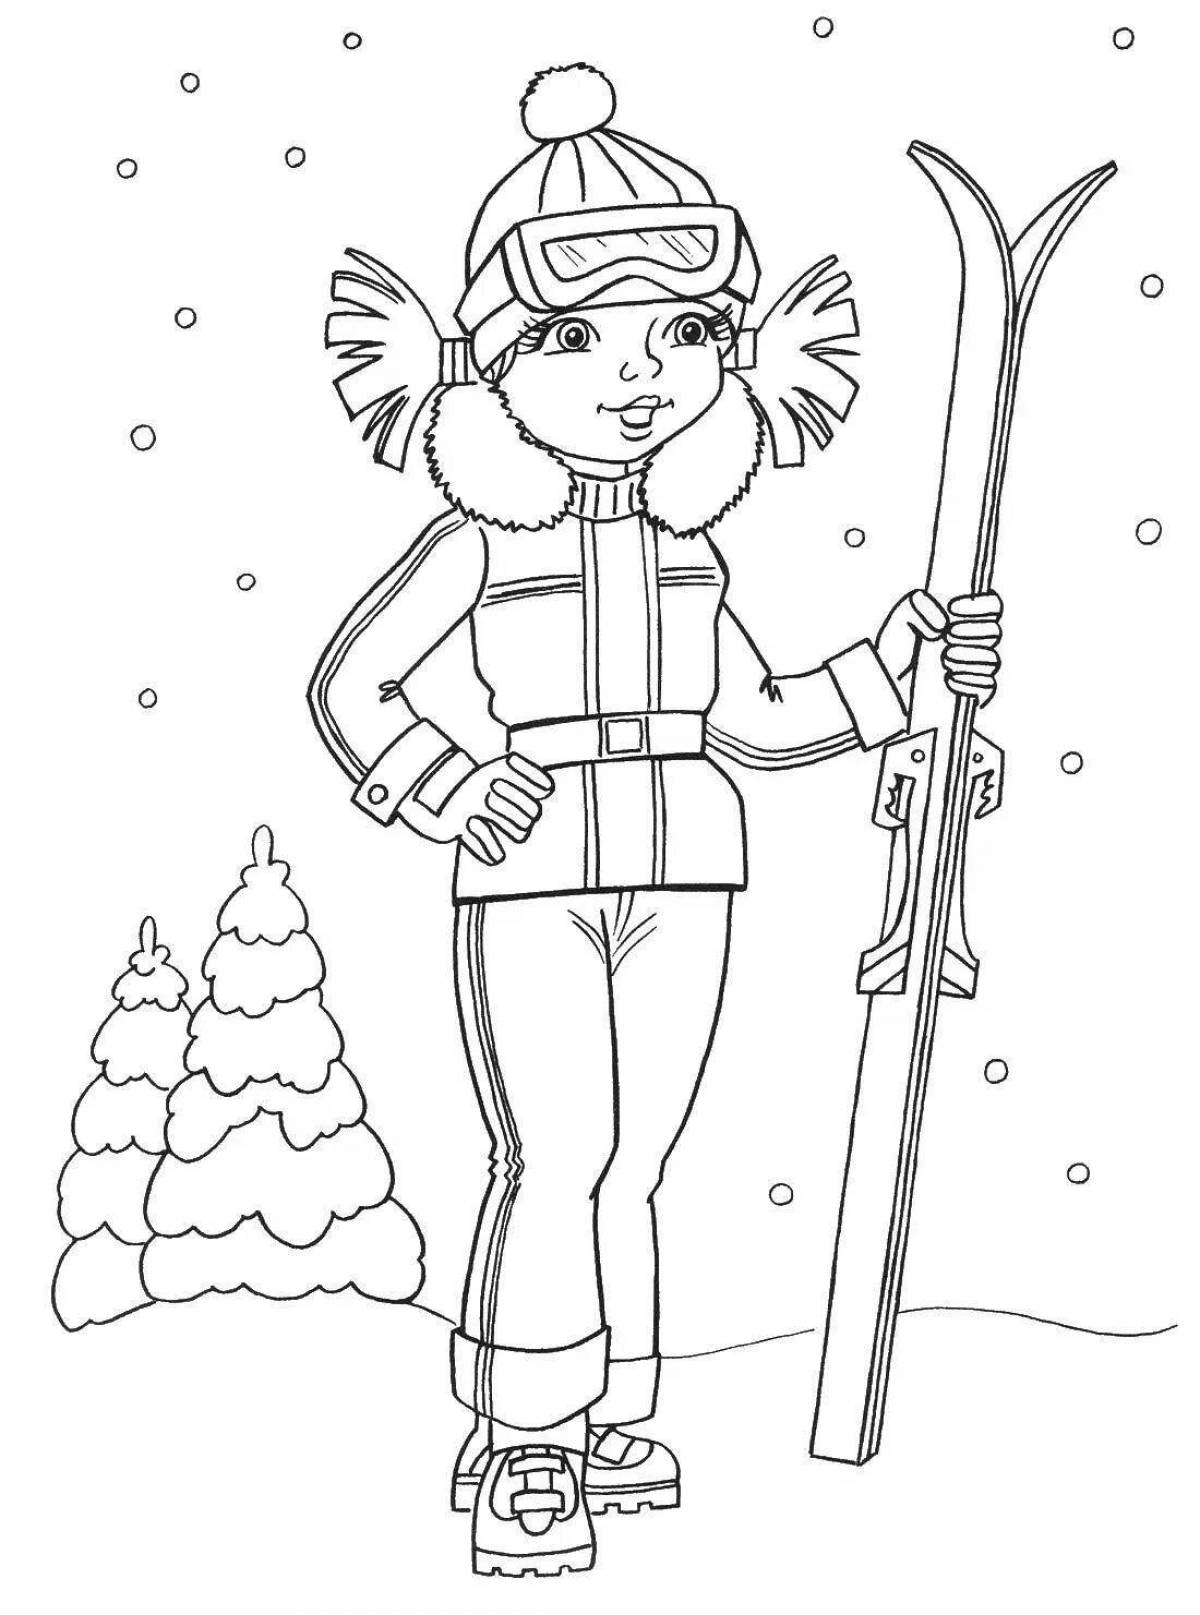 Coloring page funny boy skiing